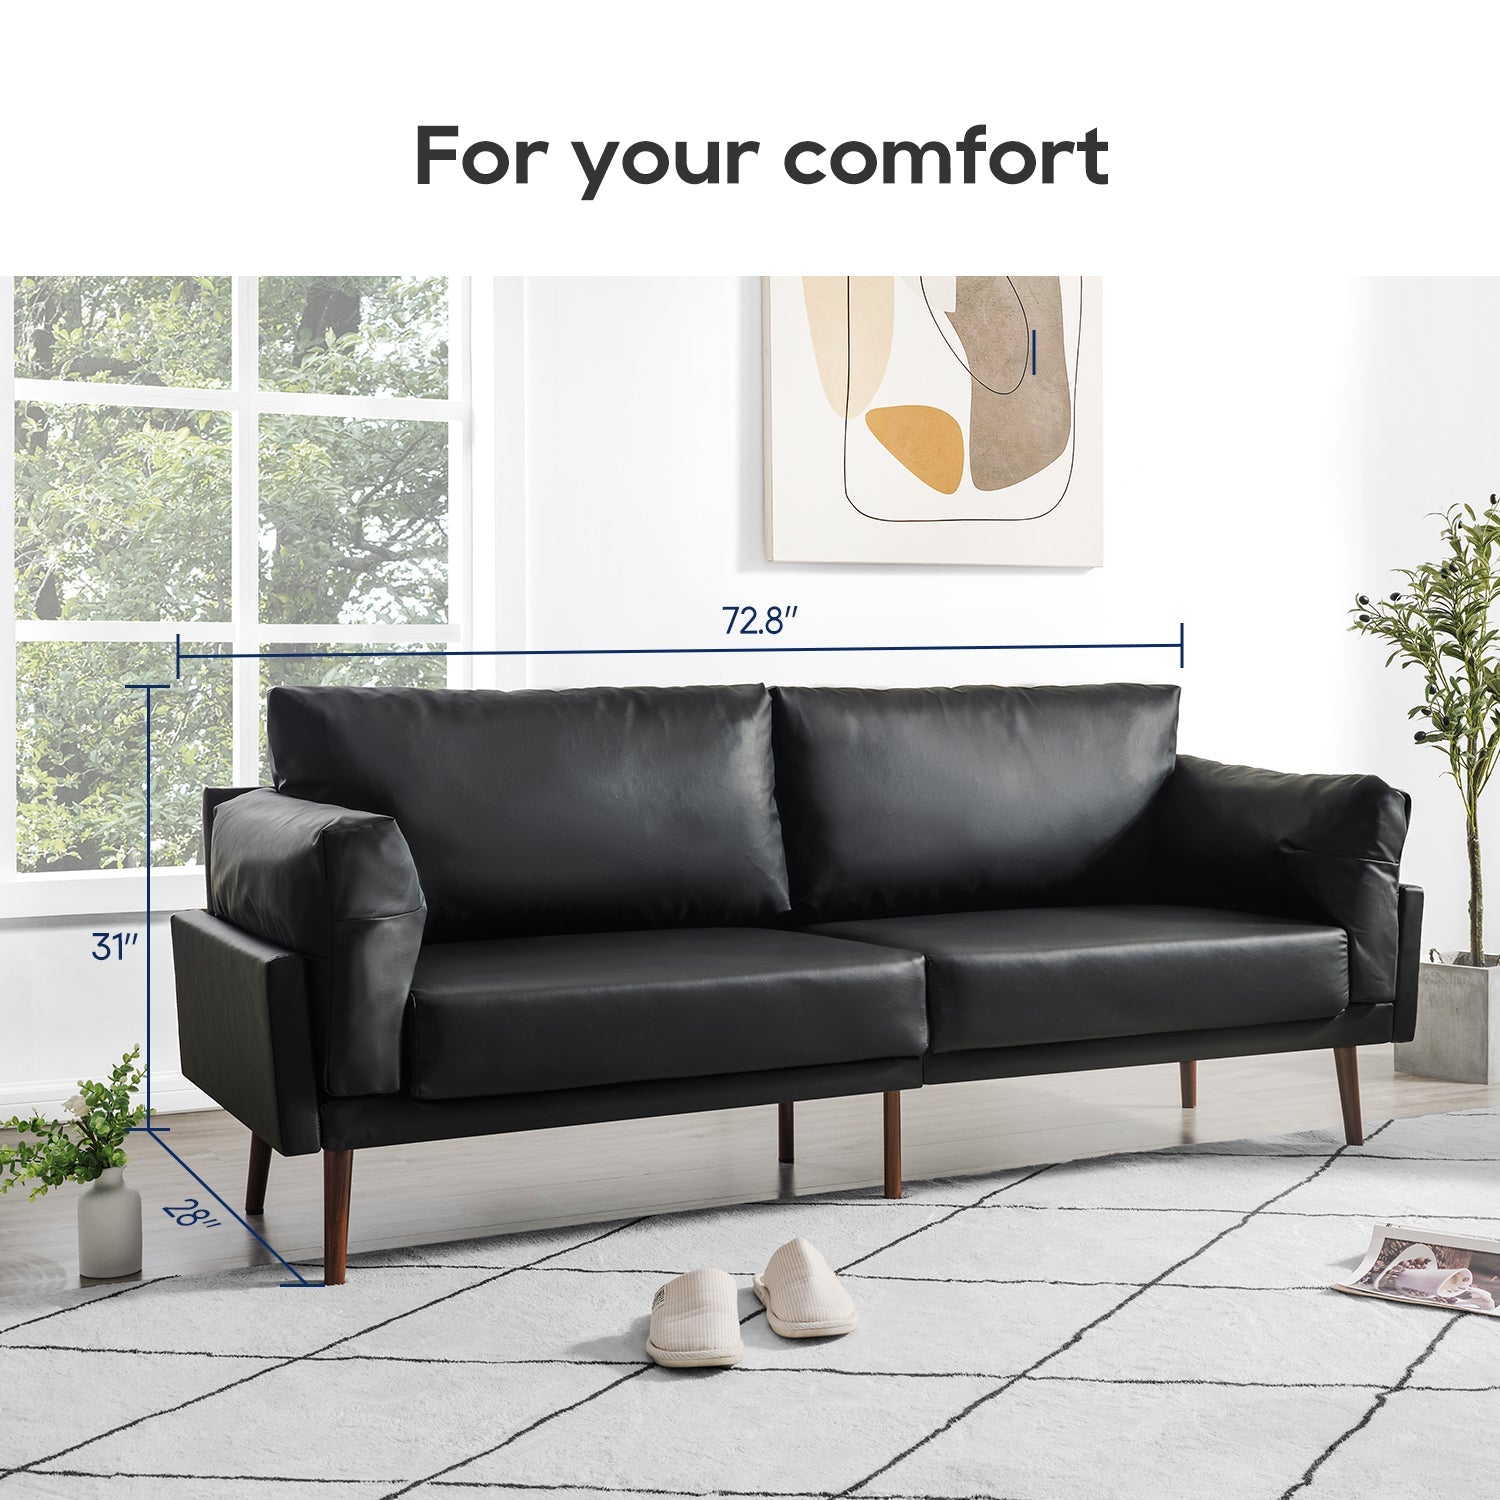 Flora Faux Leather 3-Seater Modern Sofa Couch Black Color